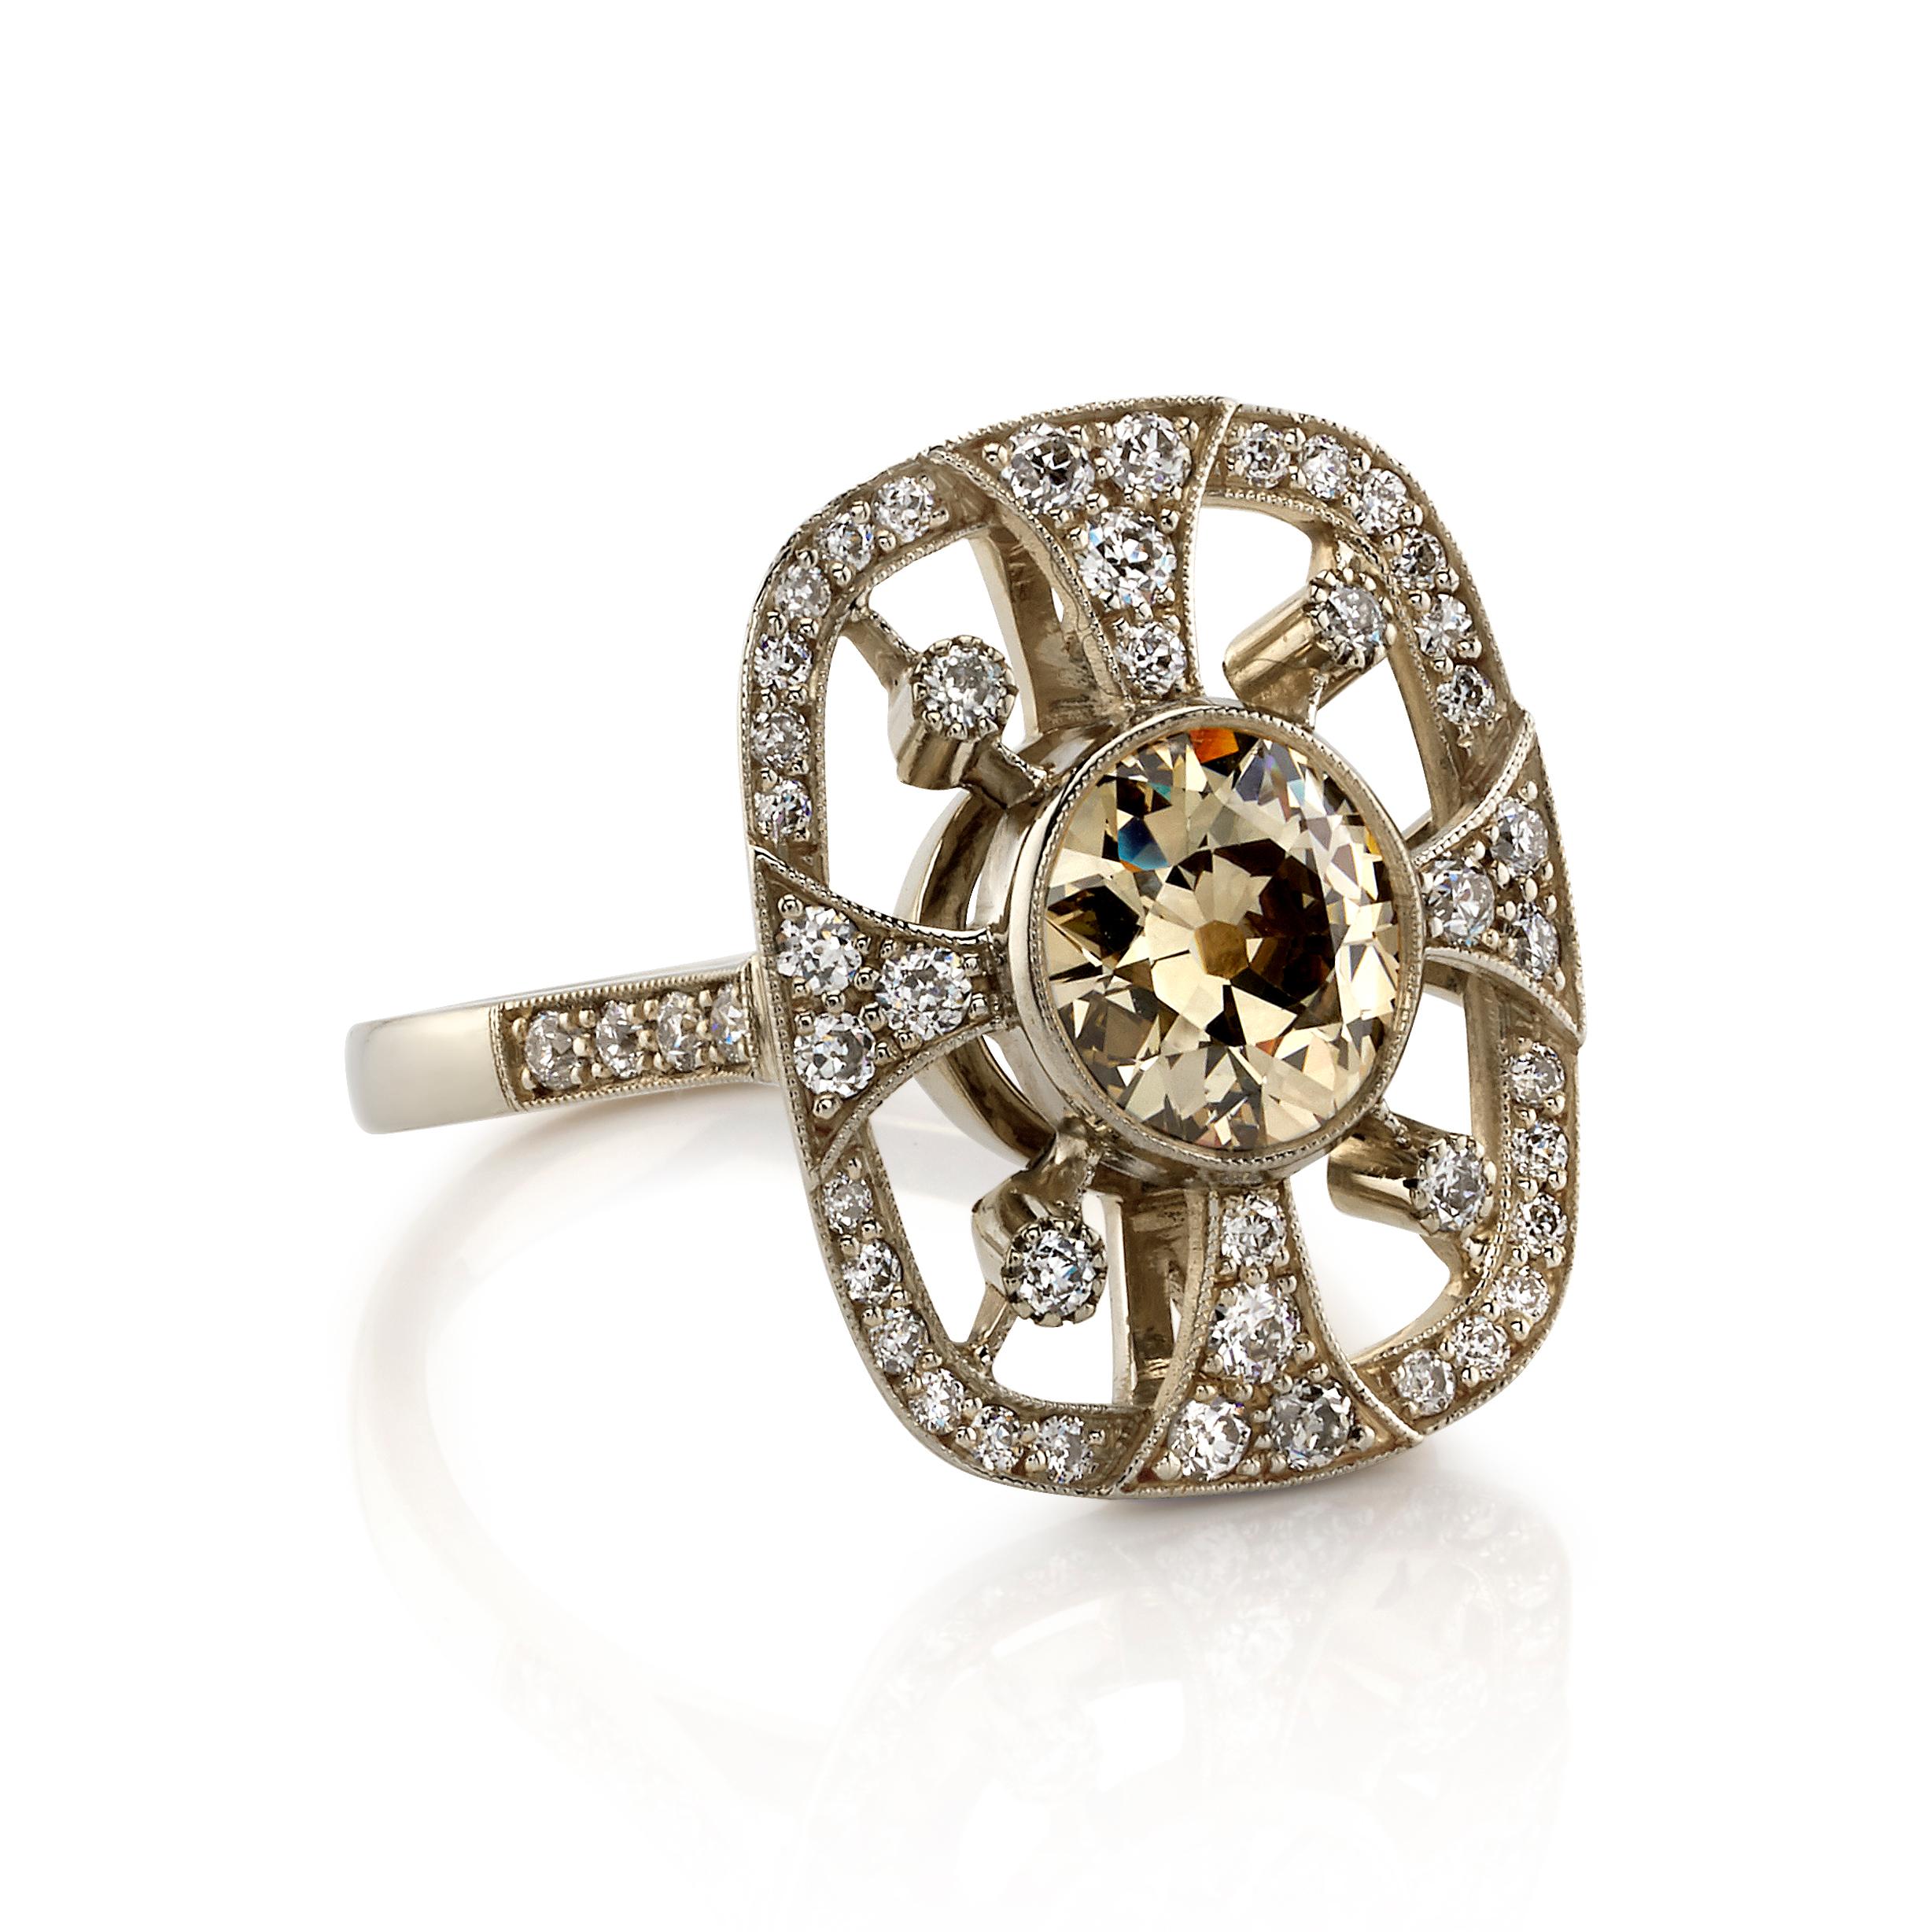 1.27ct Brown/VS old European cut diamond with 0.55ctw diamond accents set in a handcrafted 18k champagne gold mounting. This beautiful art nouveau style ring would make a wonderful right hand ring or cocktail ring. Ring is currently a size 6 and can